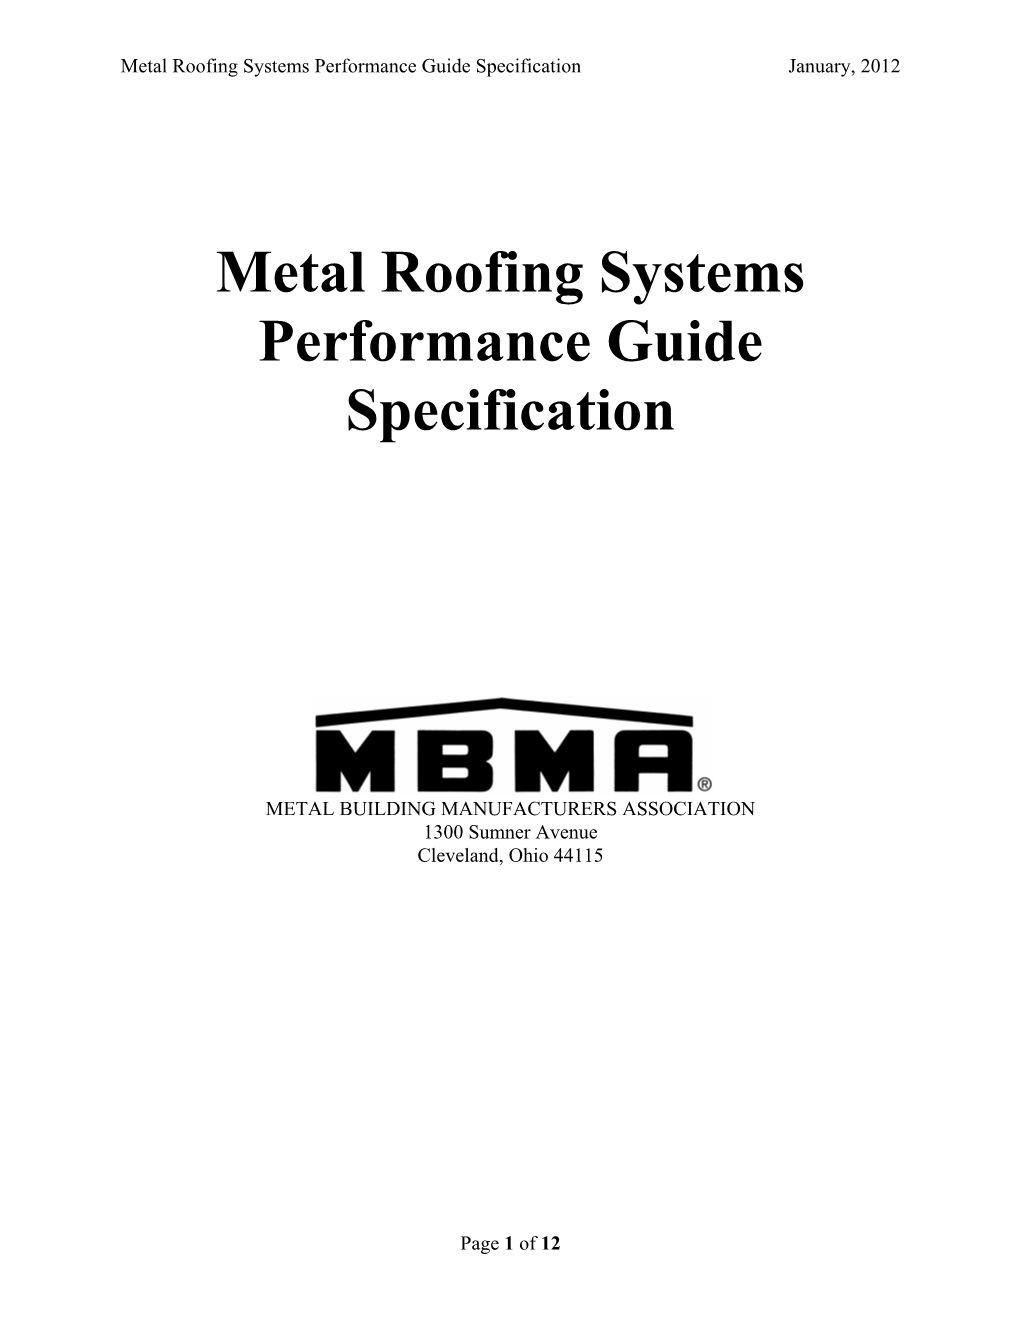 Performance Guide Specifications for Metal Roofing Systems